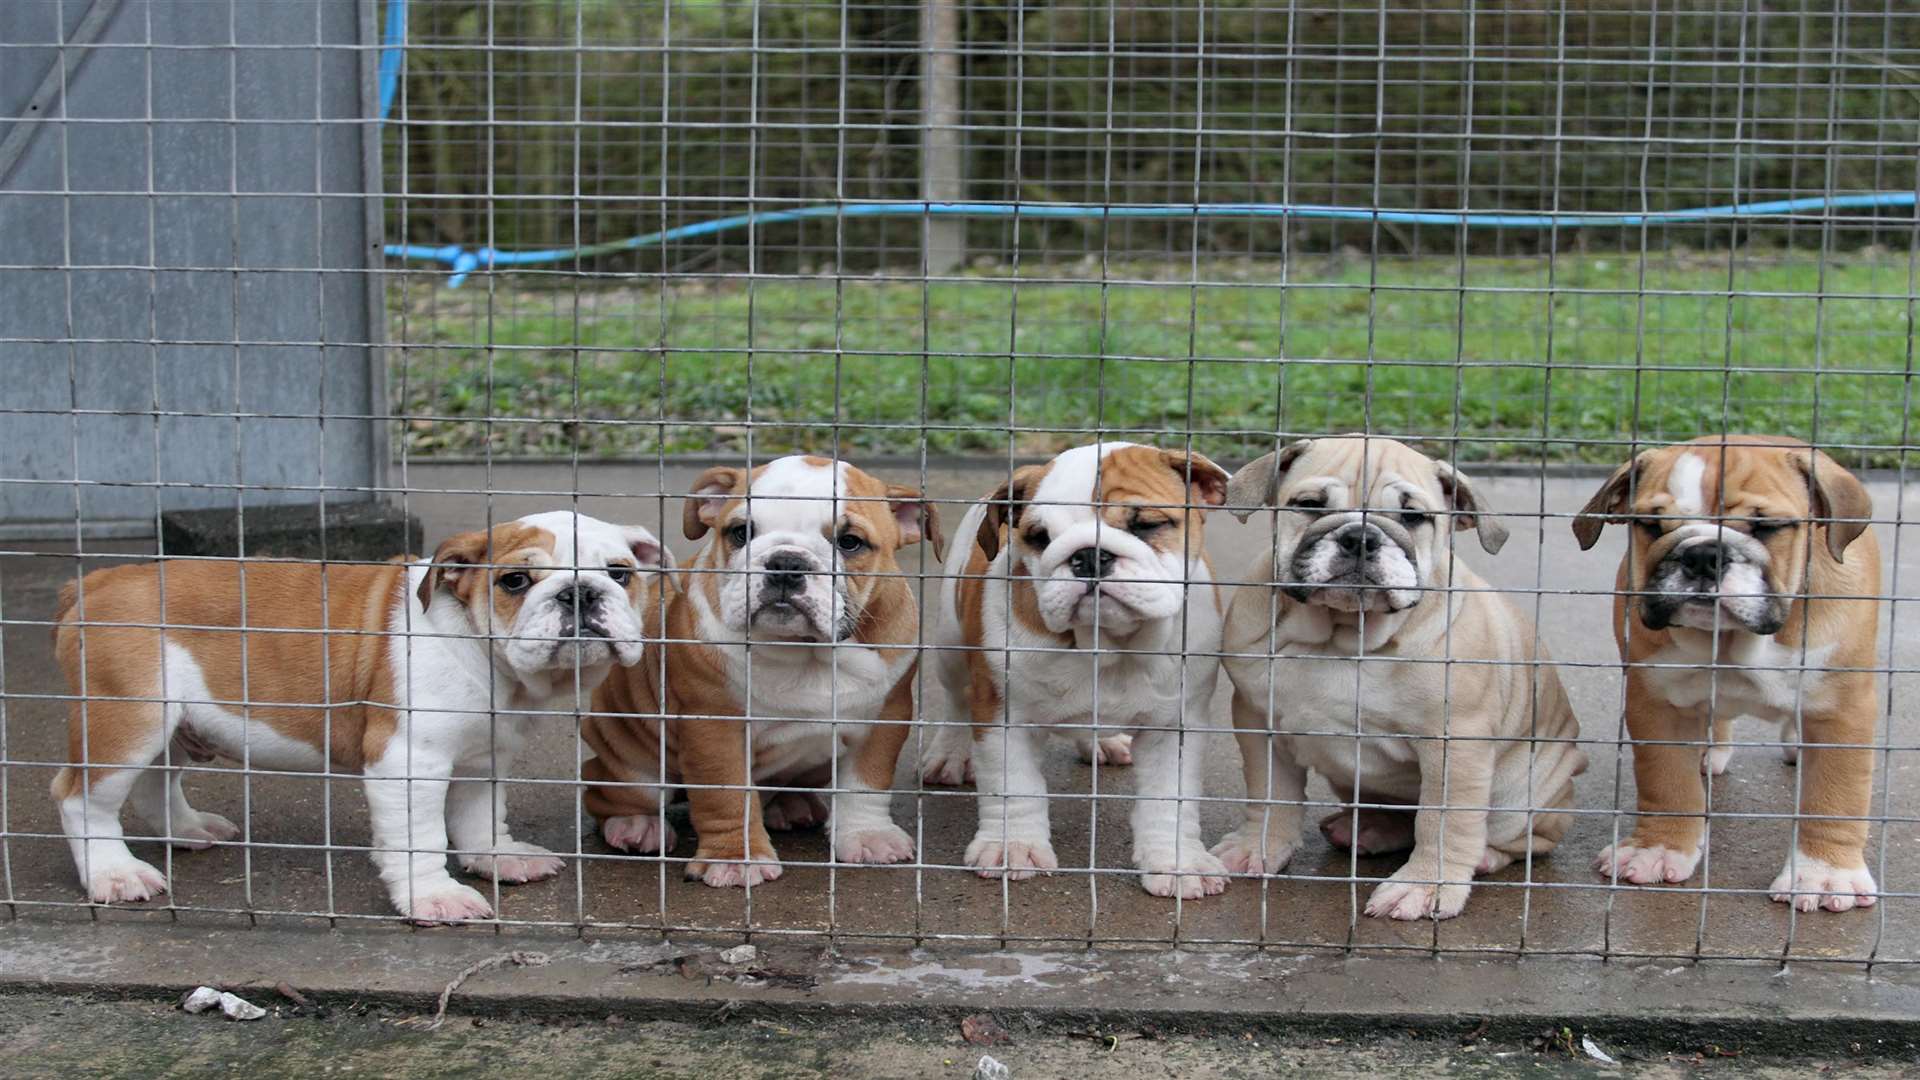 A litter of smuggled English Bulldogs spend time in quarantine to ensure they are not a health risk to the public